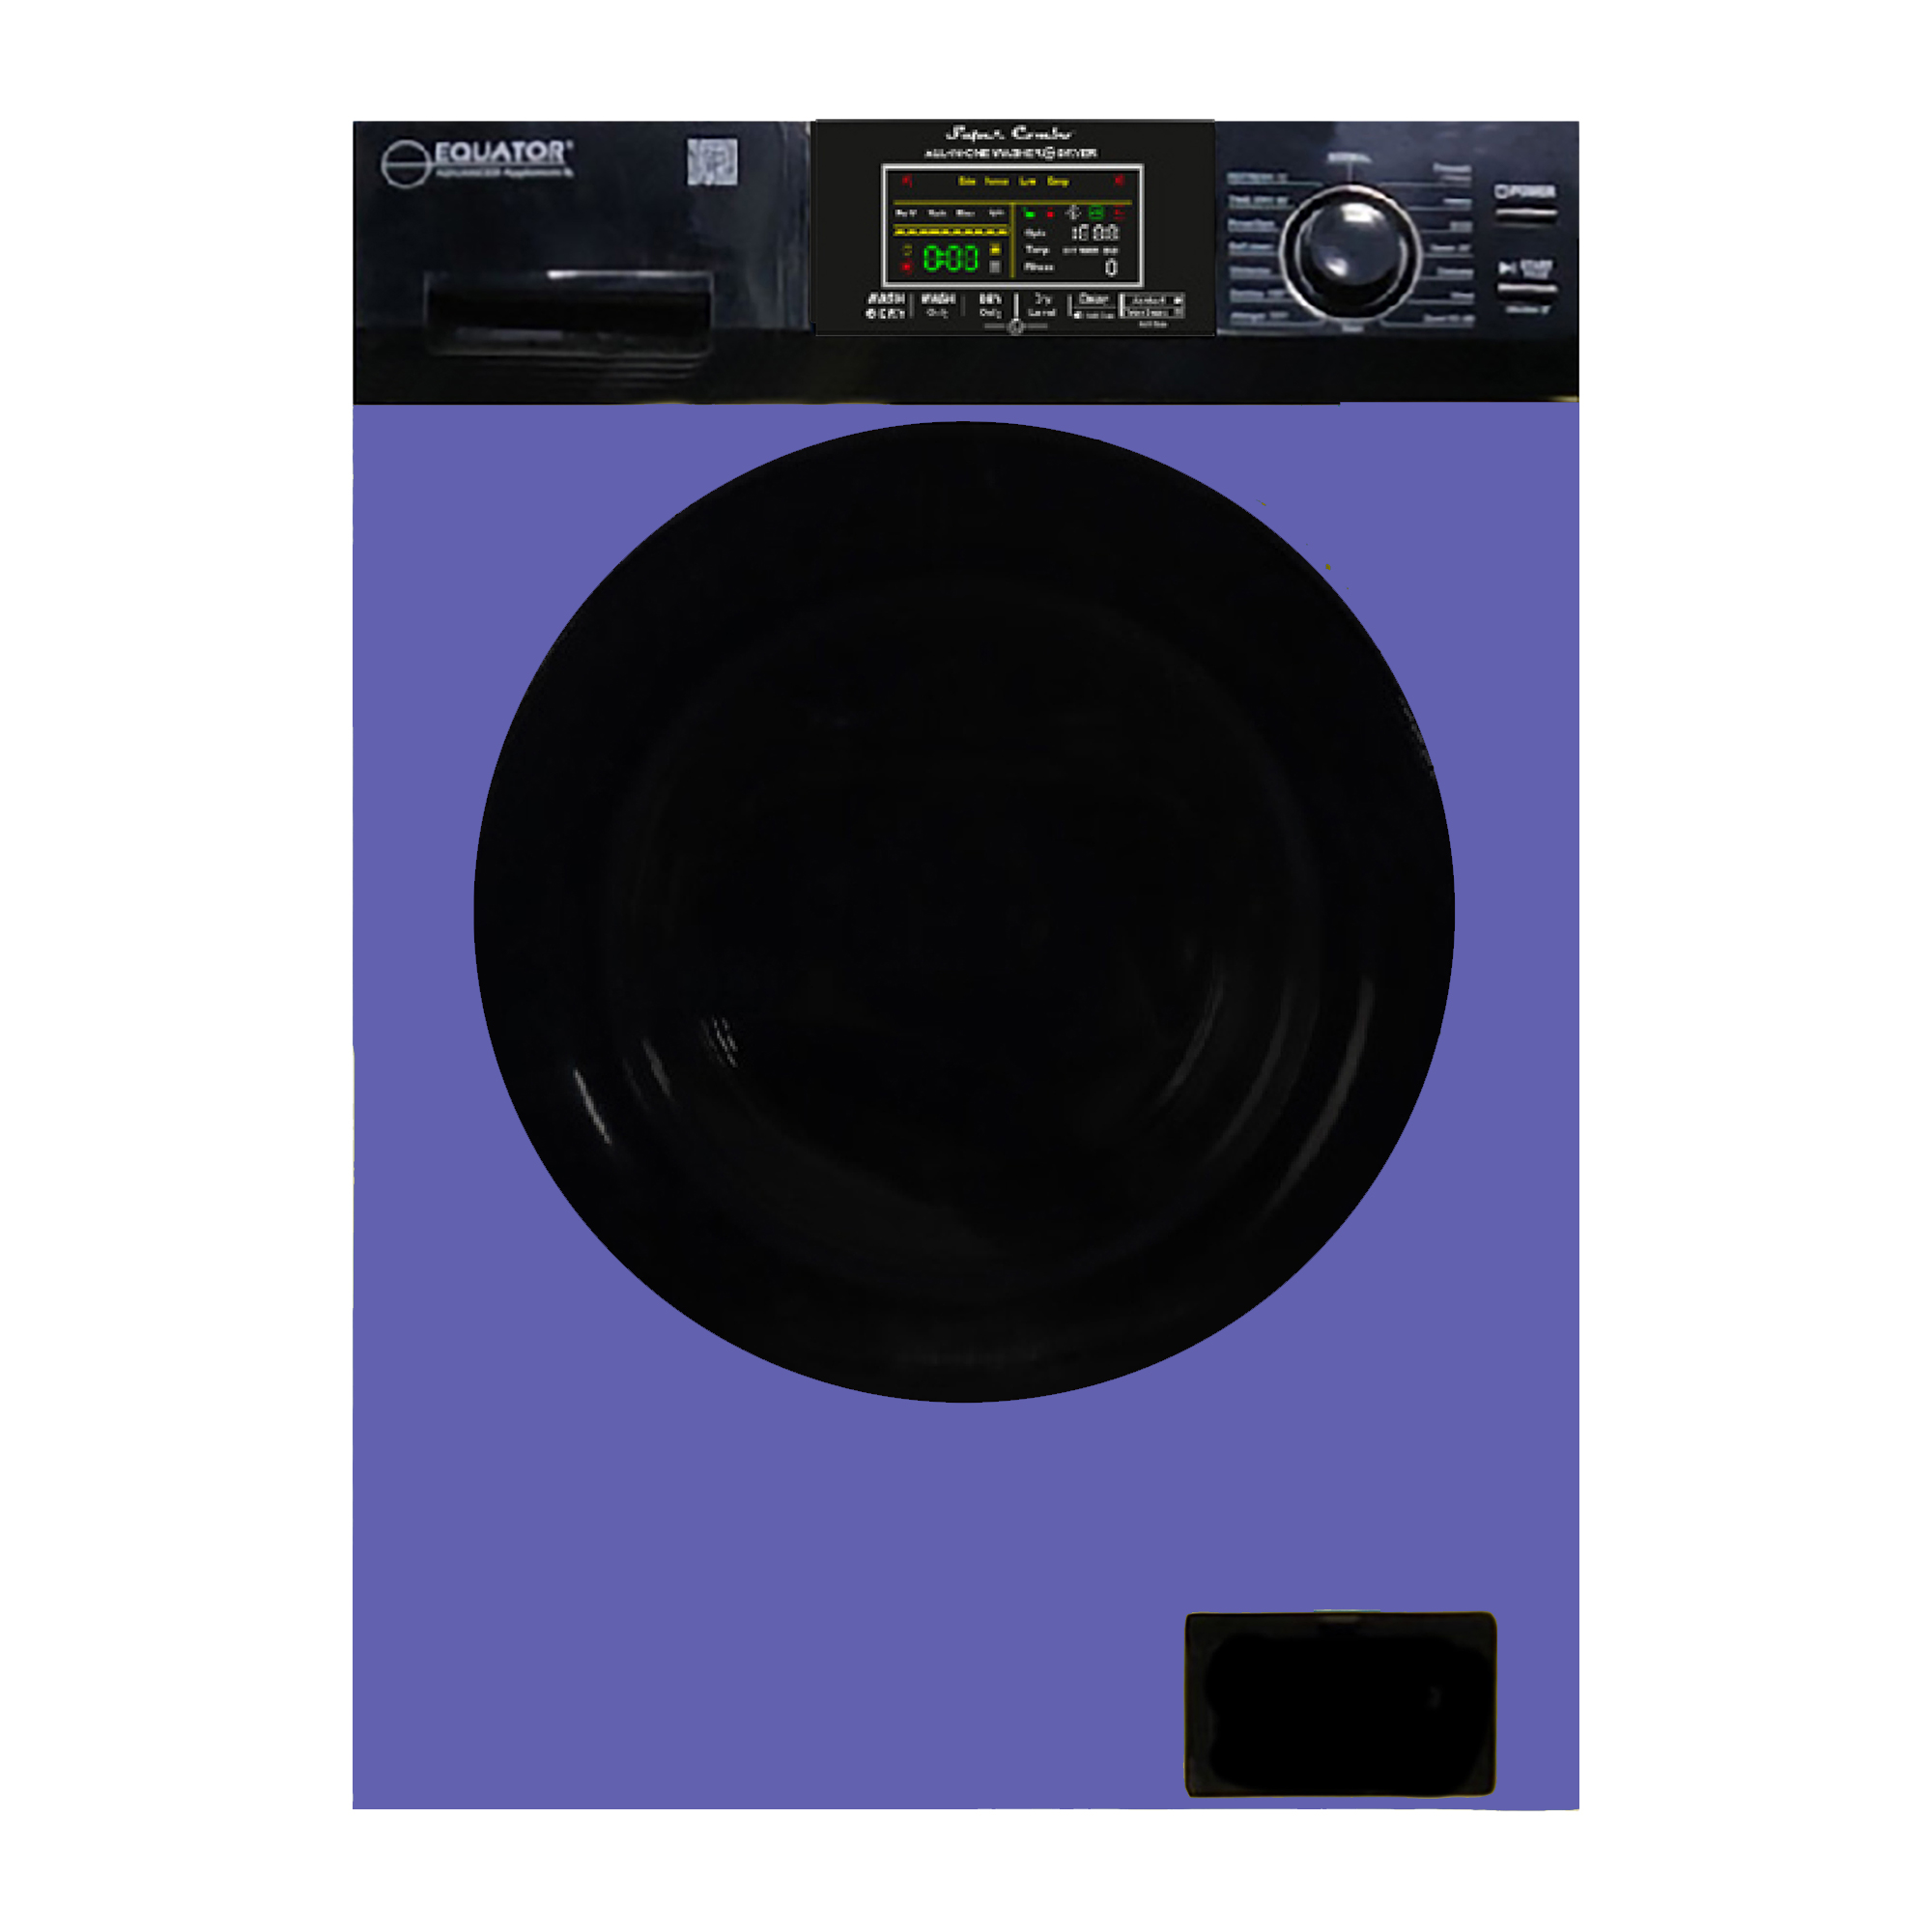 SUPER COMBO WASHER DRYER PERIWINKLE Version 3